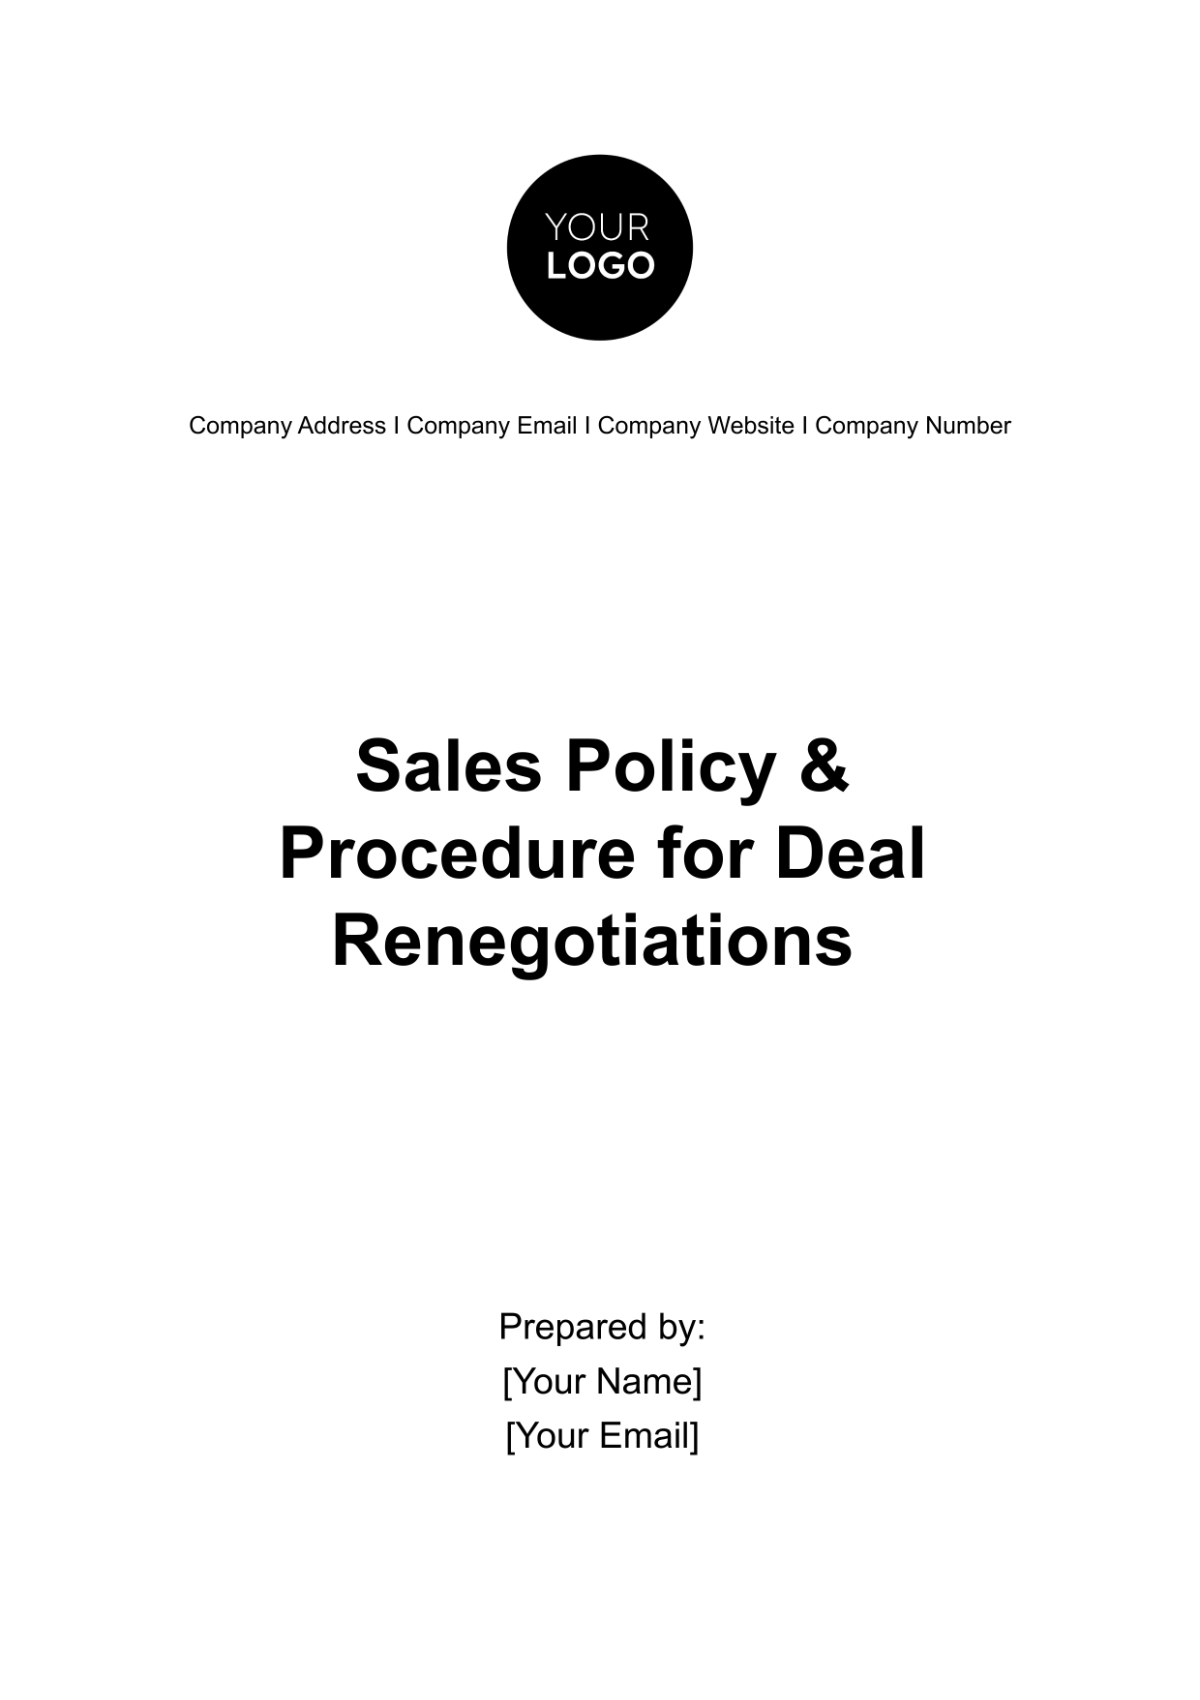 Sales Policy & Procedure for Deal Renegotiations Template